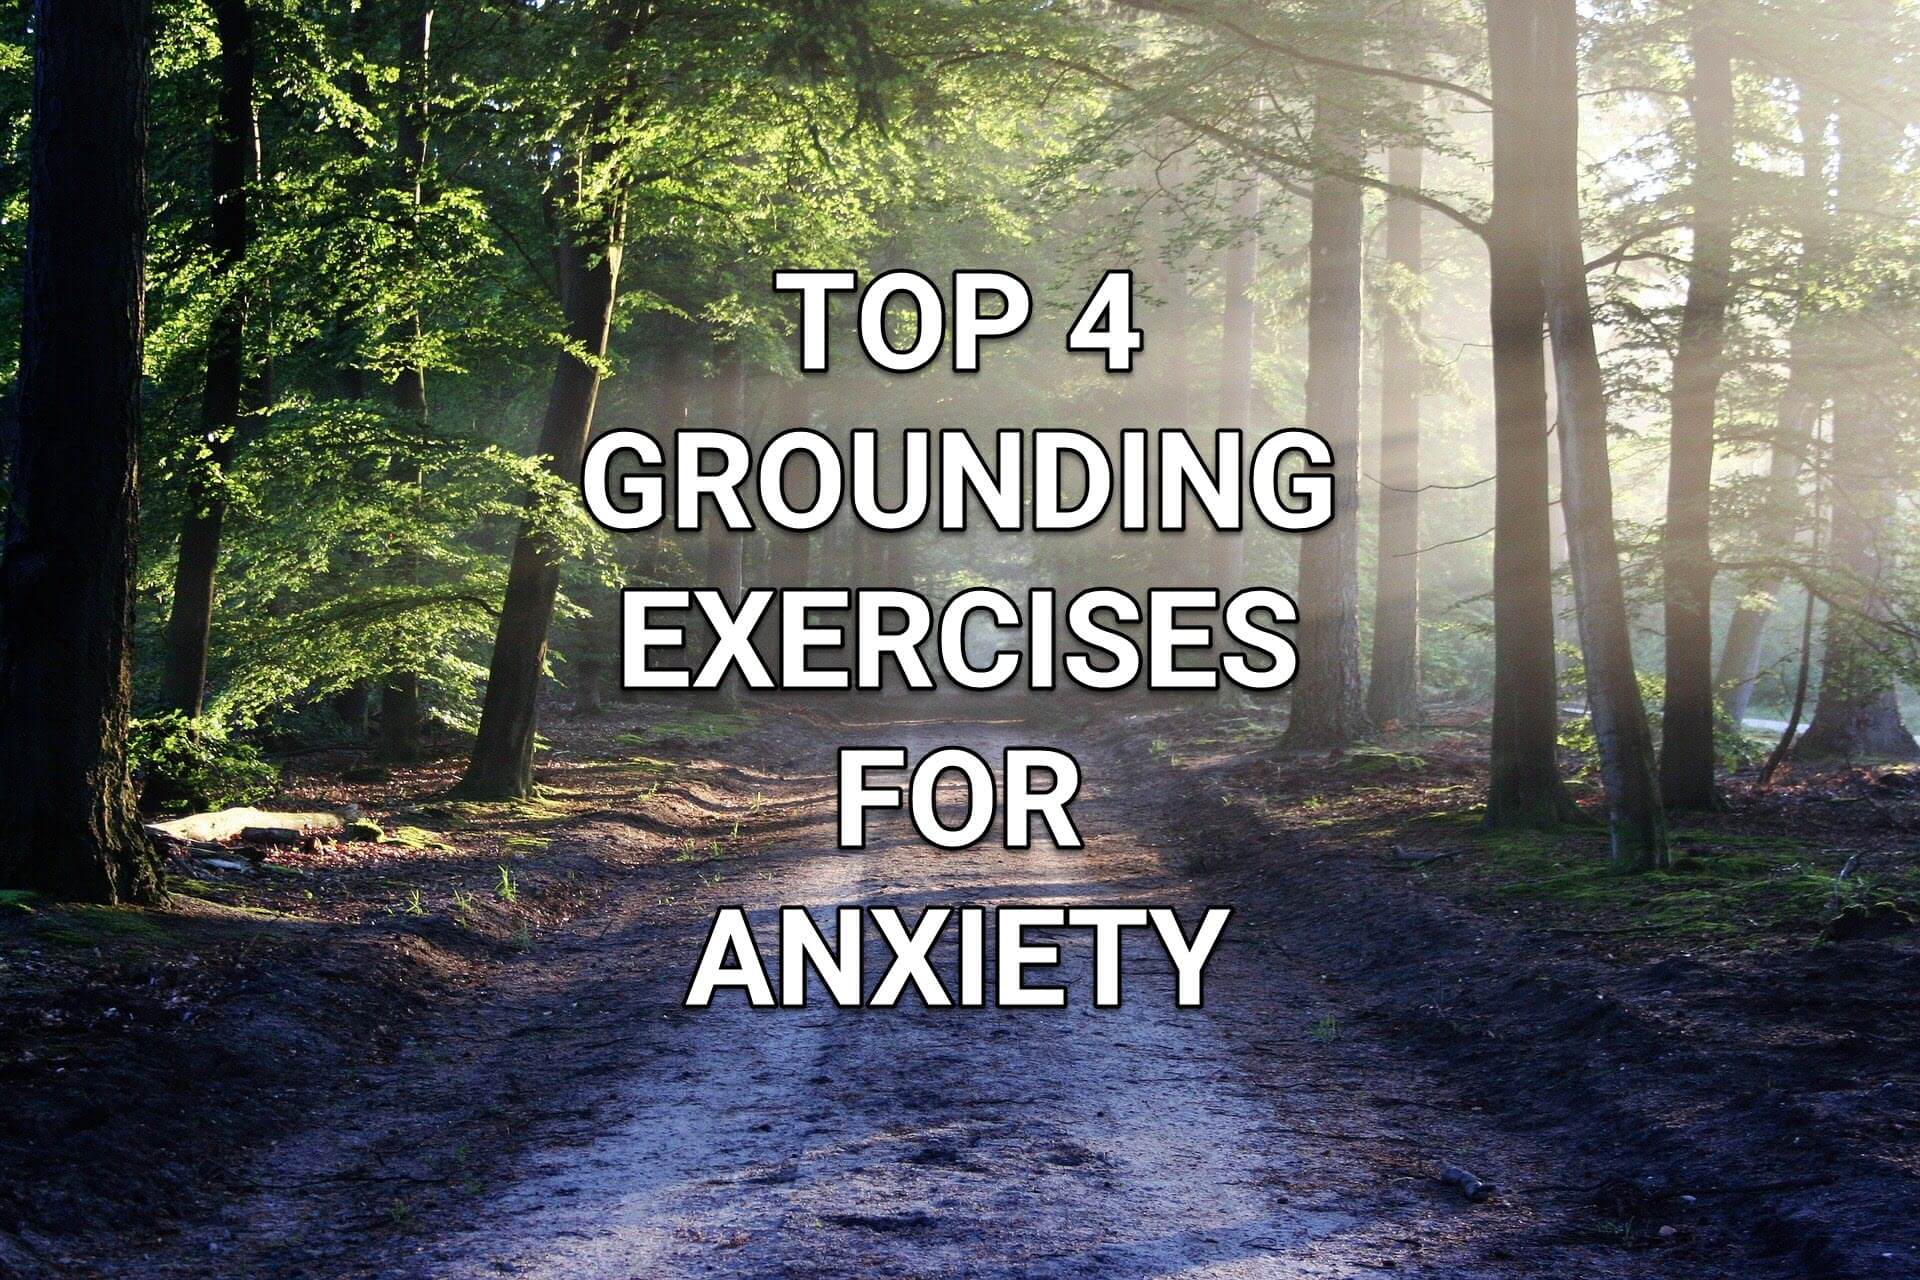 Top 4 Grounding Exercises for Anxiety